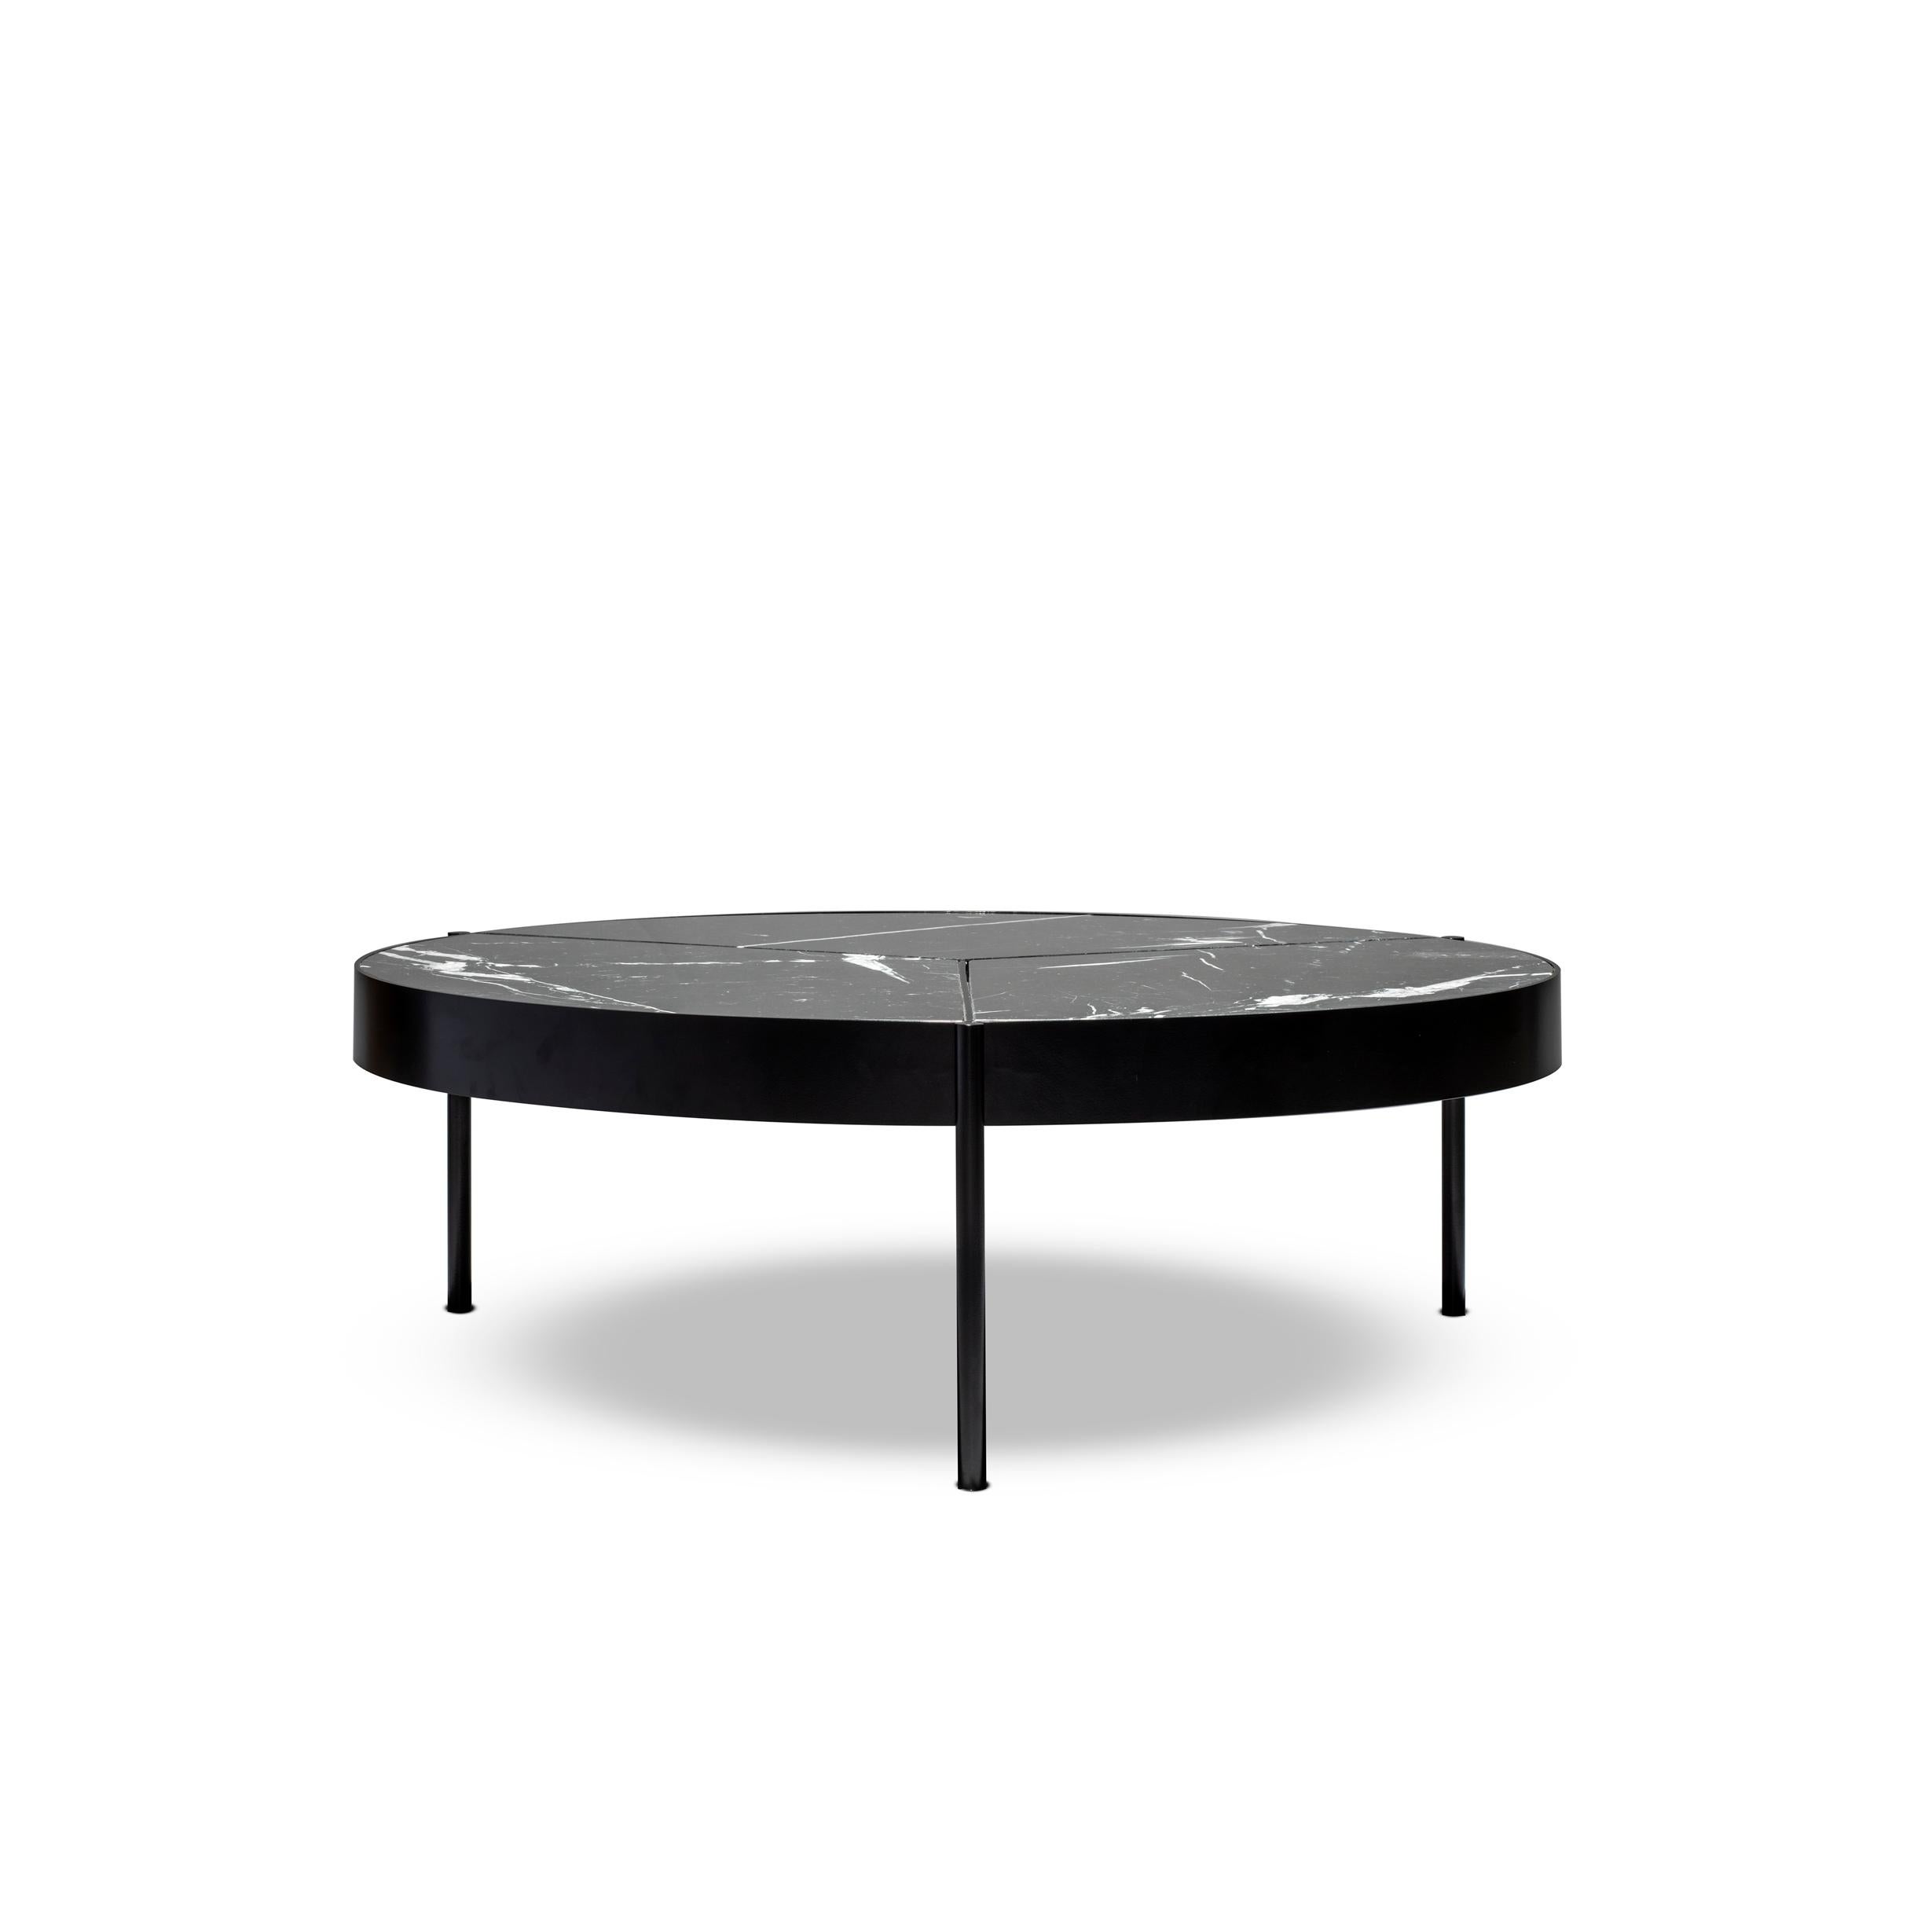 Ray Coffee Table 100, in Black Lacquered Bronze and Nero Marquina Top by Duistt

Ray coffee table is a combination of elegance and versatility. Its three delicate rays confine division to the table top, allowing customization and creativity with our